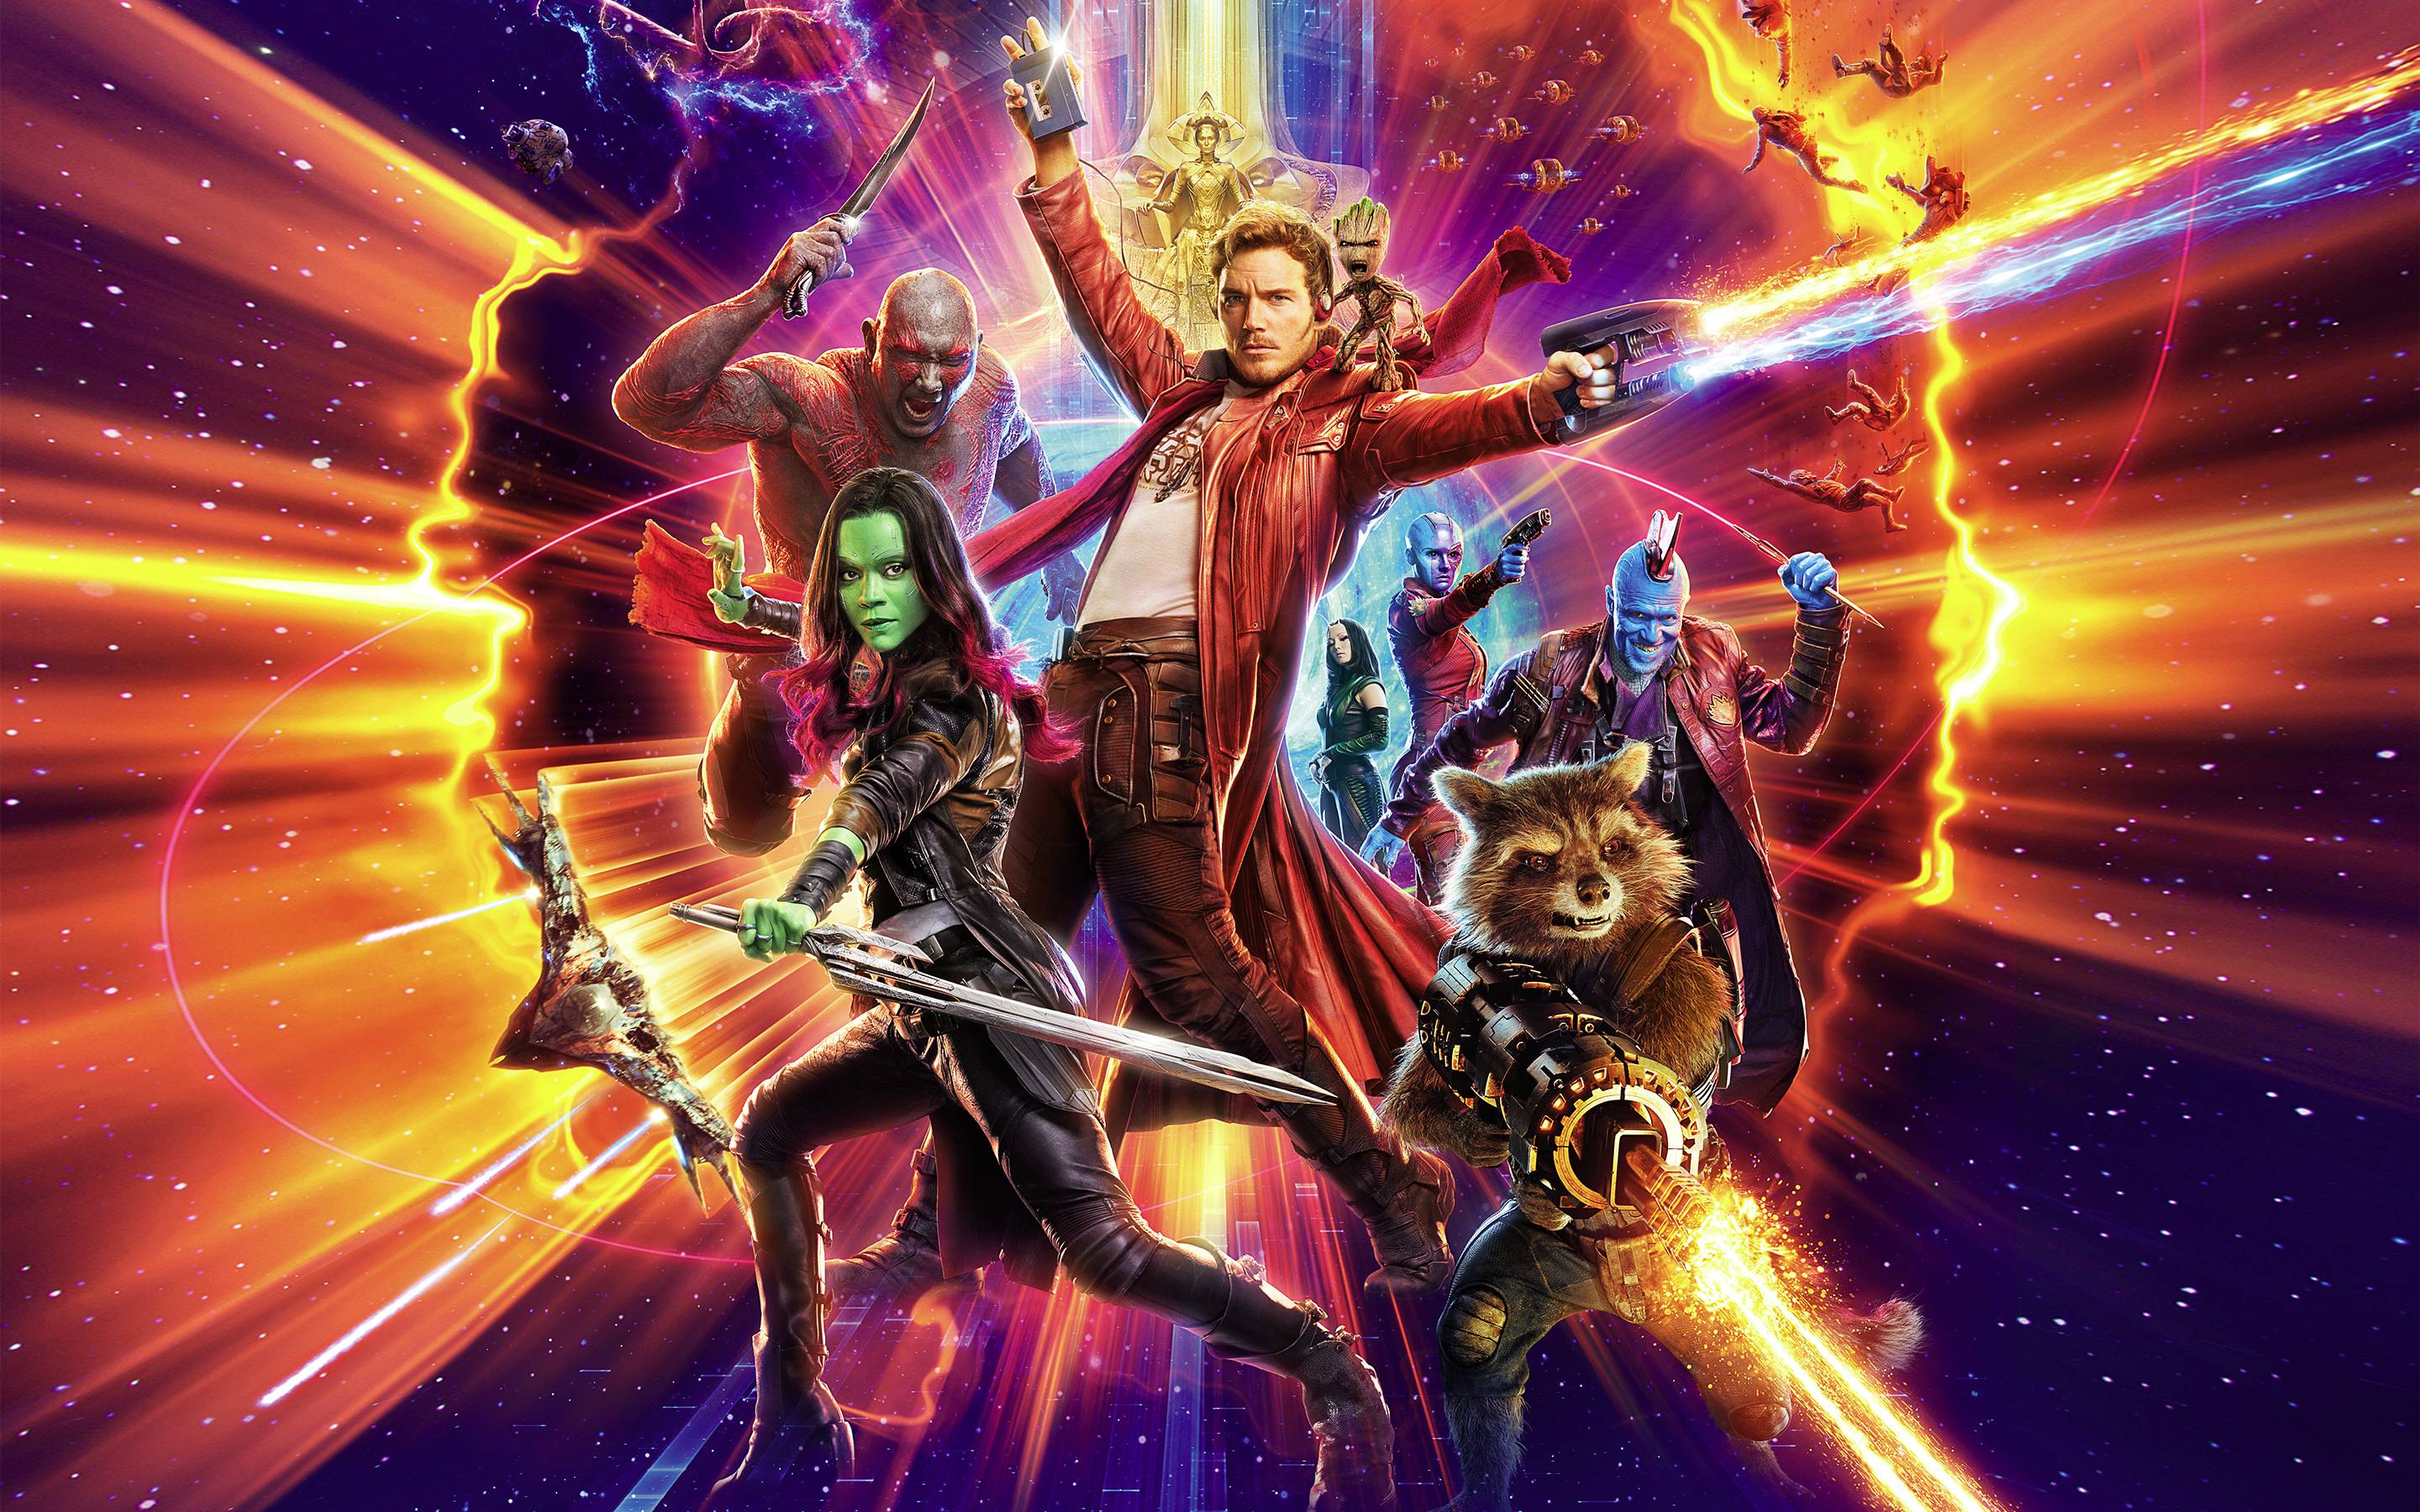 Official 'Guardians of the Galaxy Vol. 2' textless poster